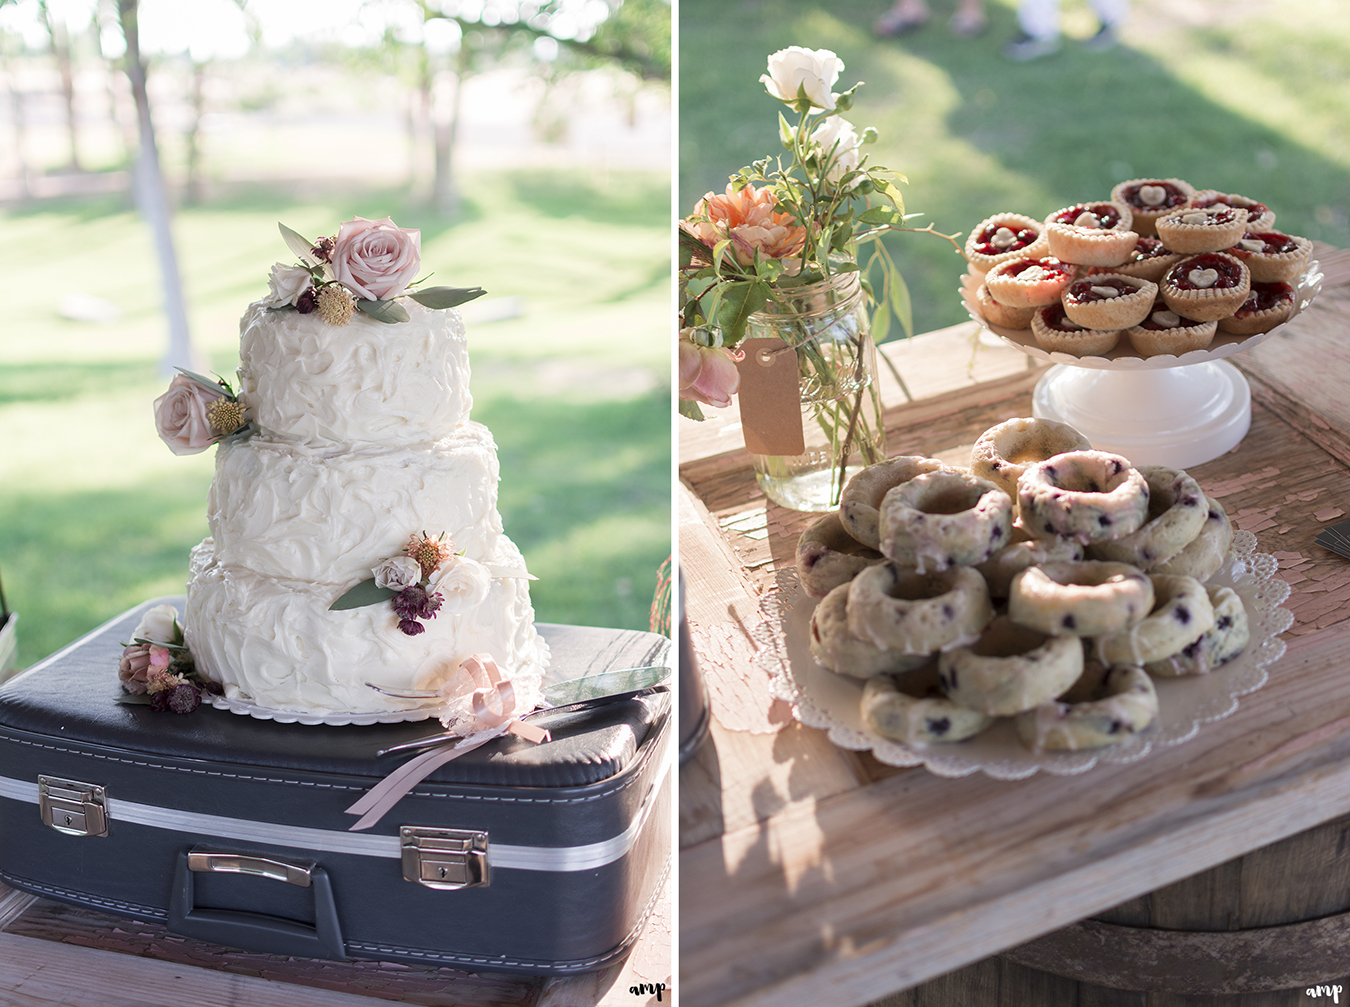 Frosted wedding cake and dessert table sitting on an antique suitcase